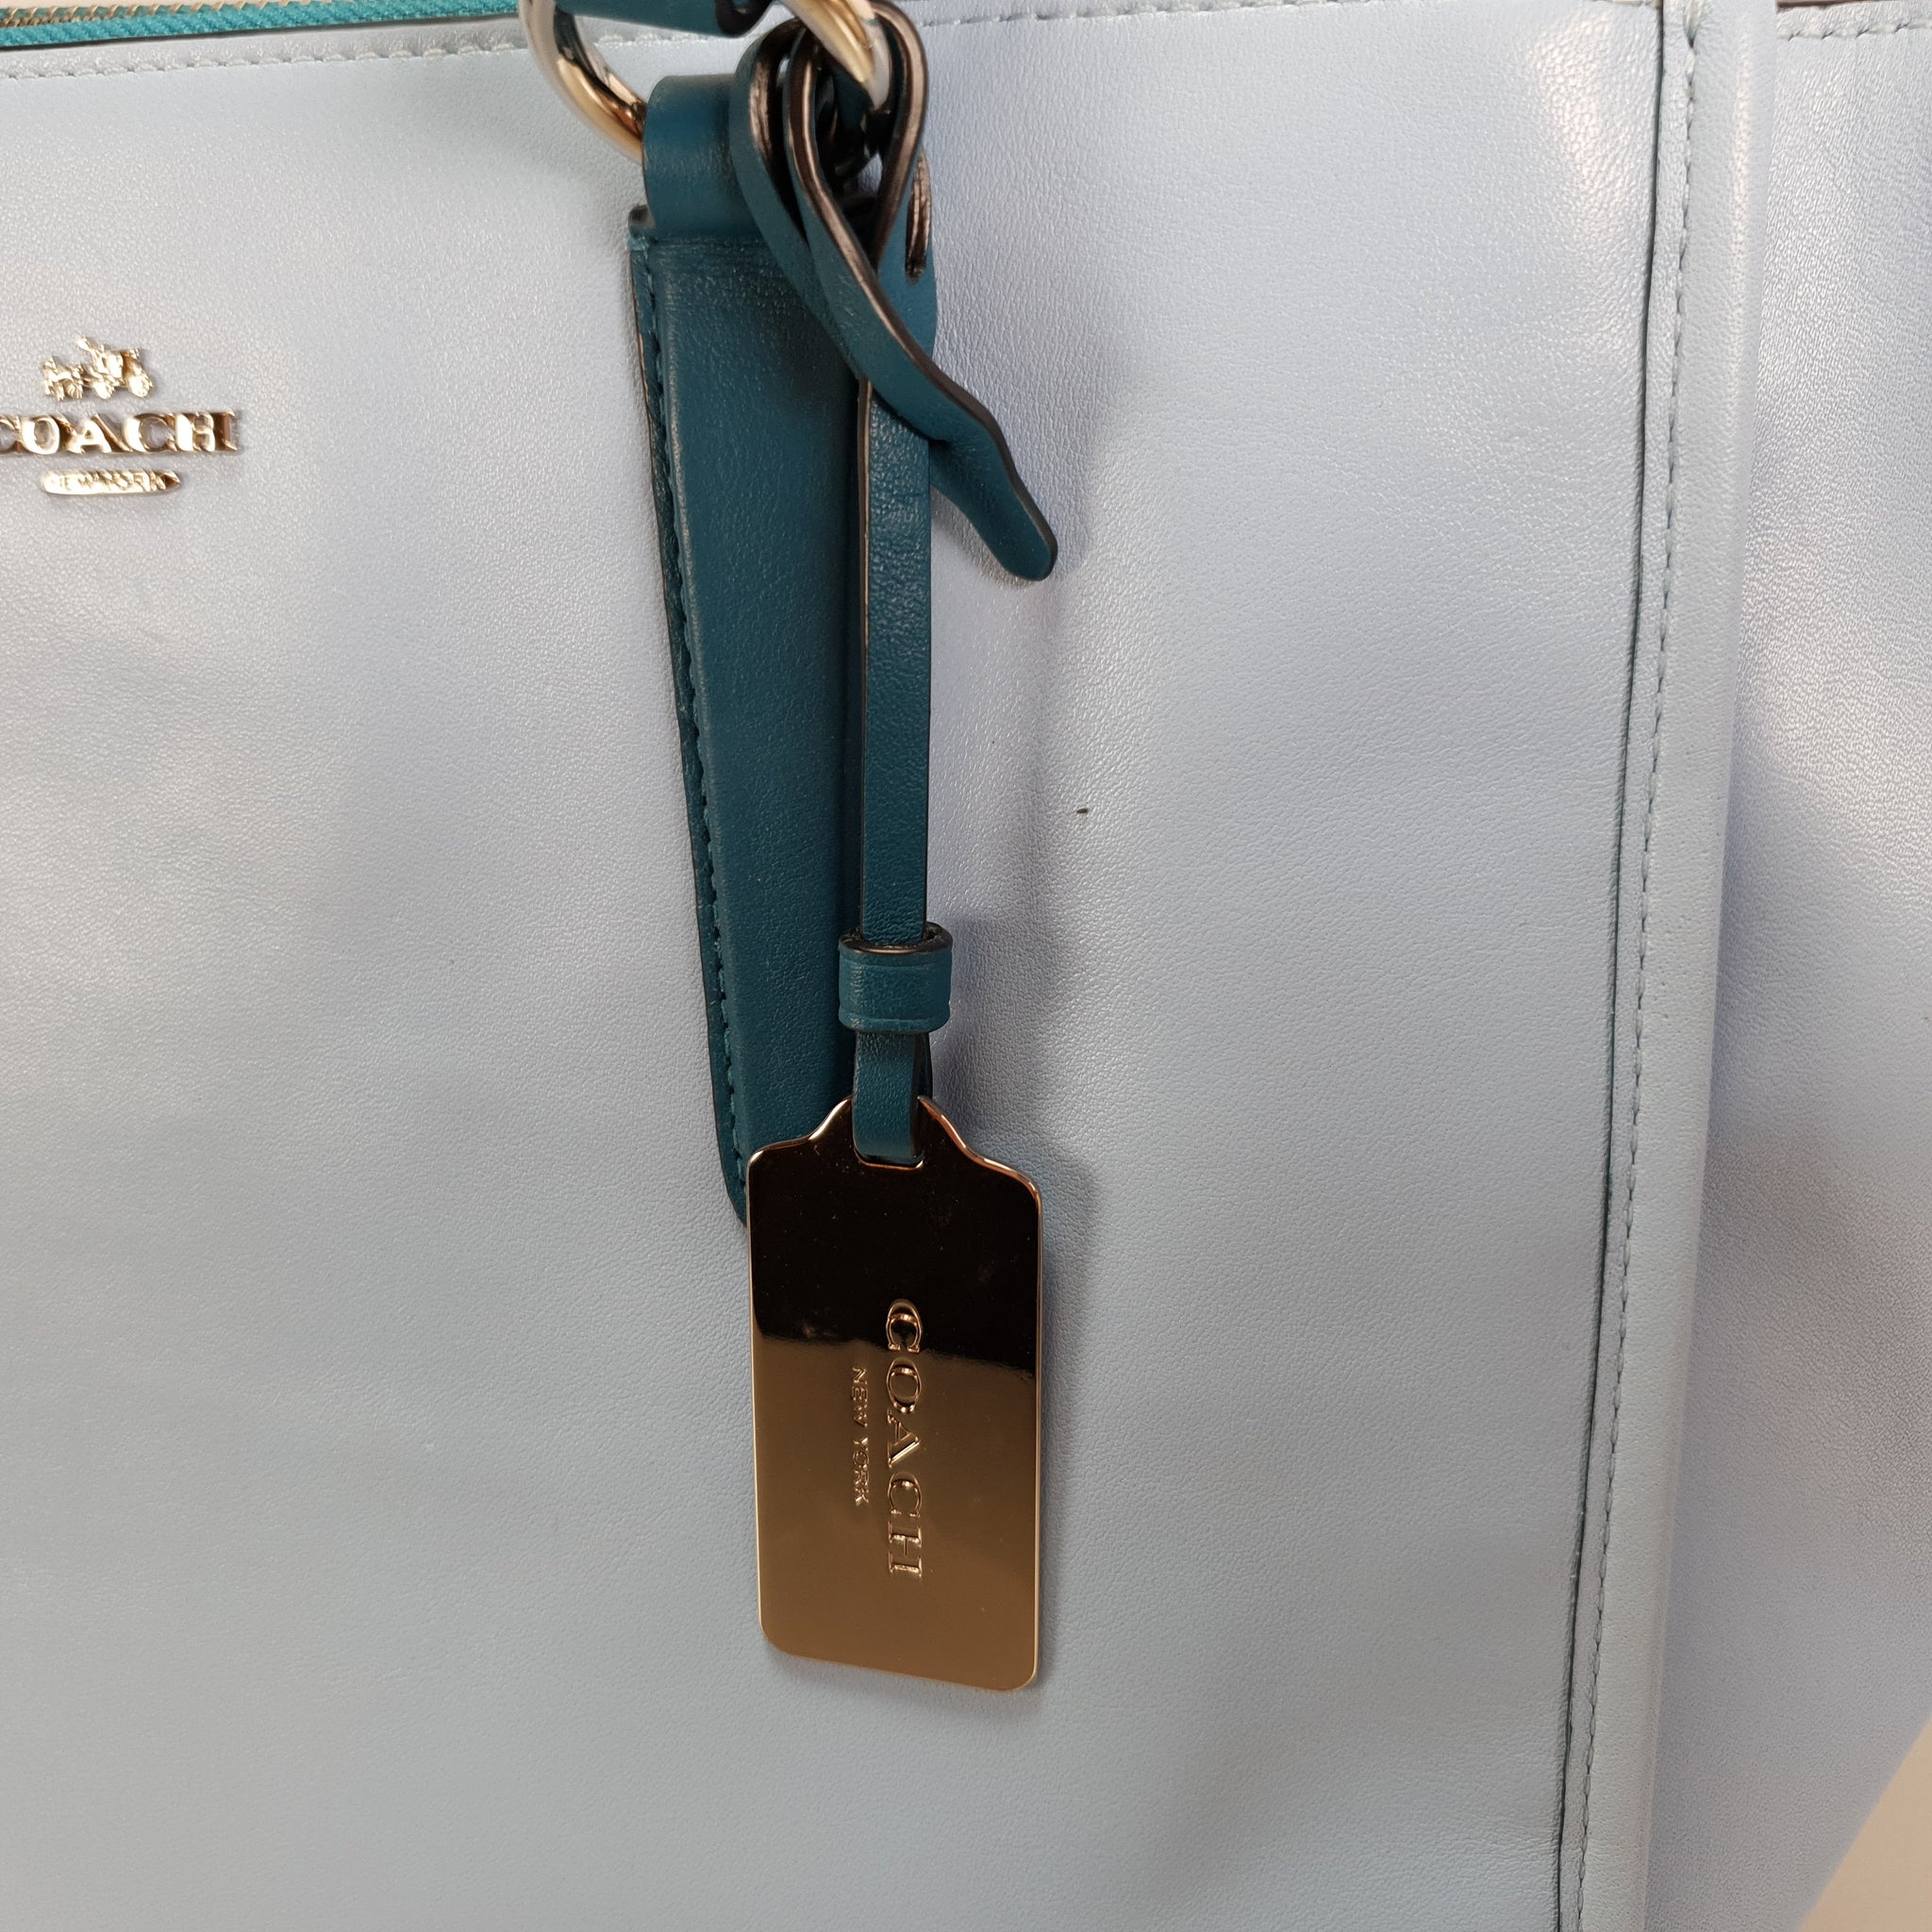 Coach Crosby Carryall Double Zip Tote Bag Review 